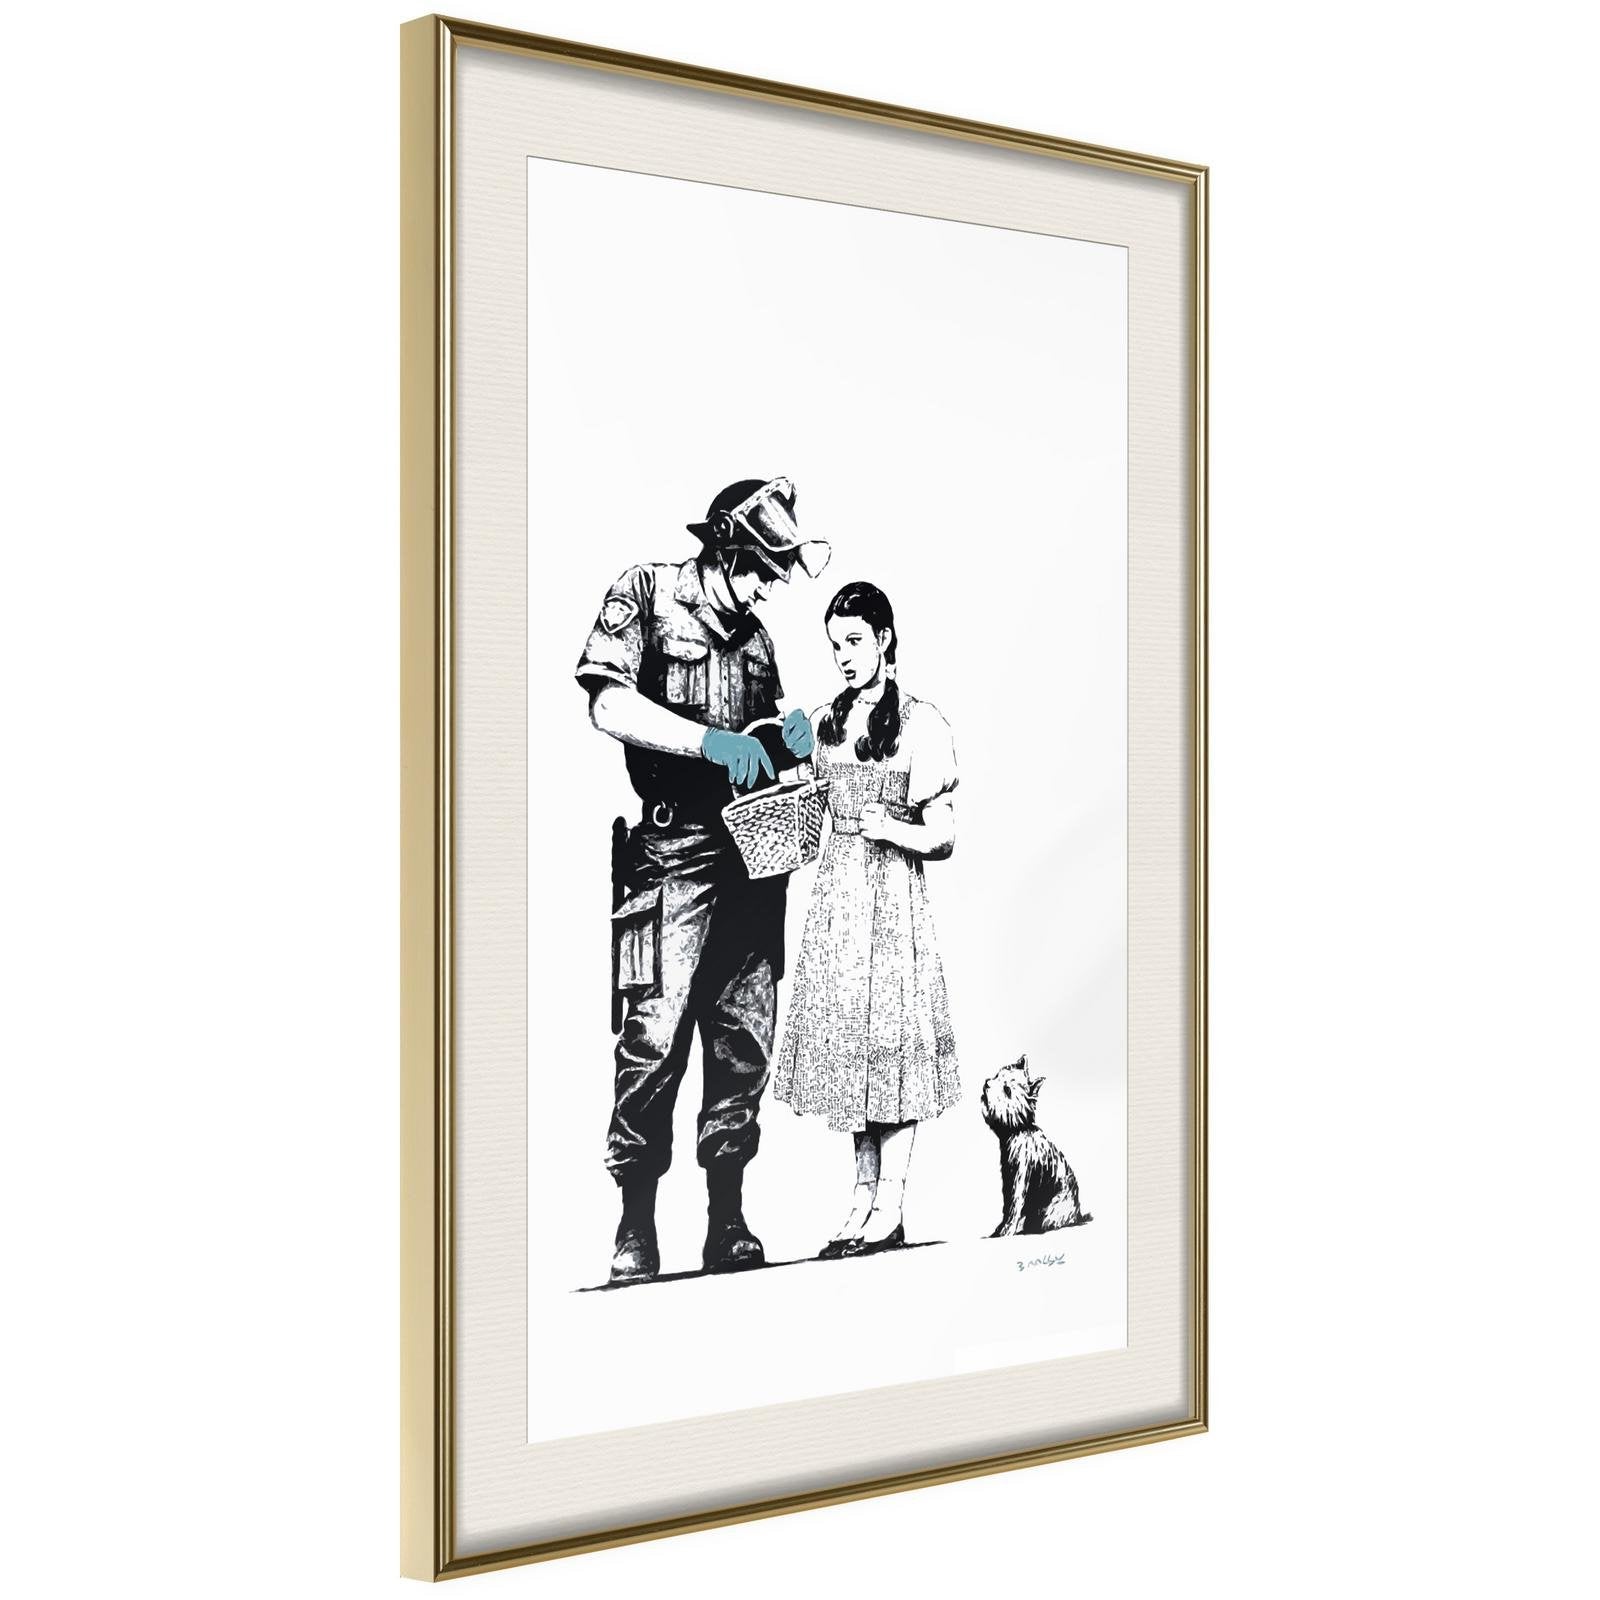 Inramad Poster / Tavla - Banksy: Stop and Search-Poster Inramad-Artgeist-20x30-Guldram med passepartout-peaceofhome.se